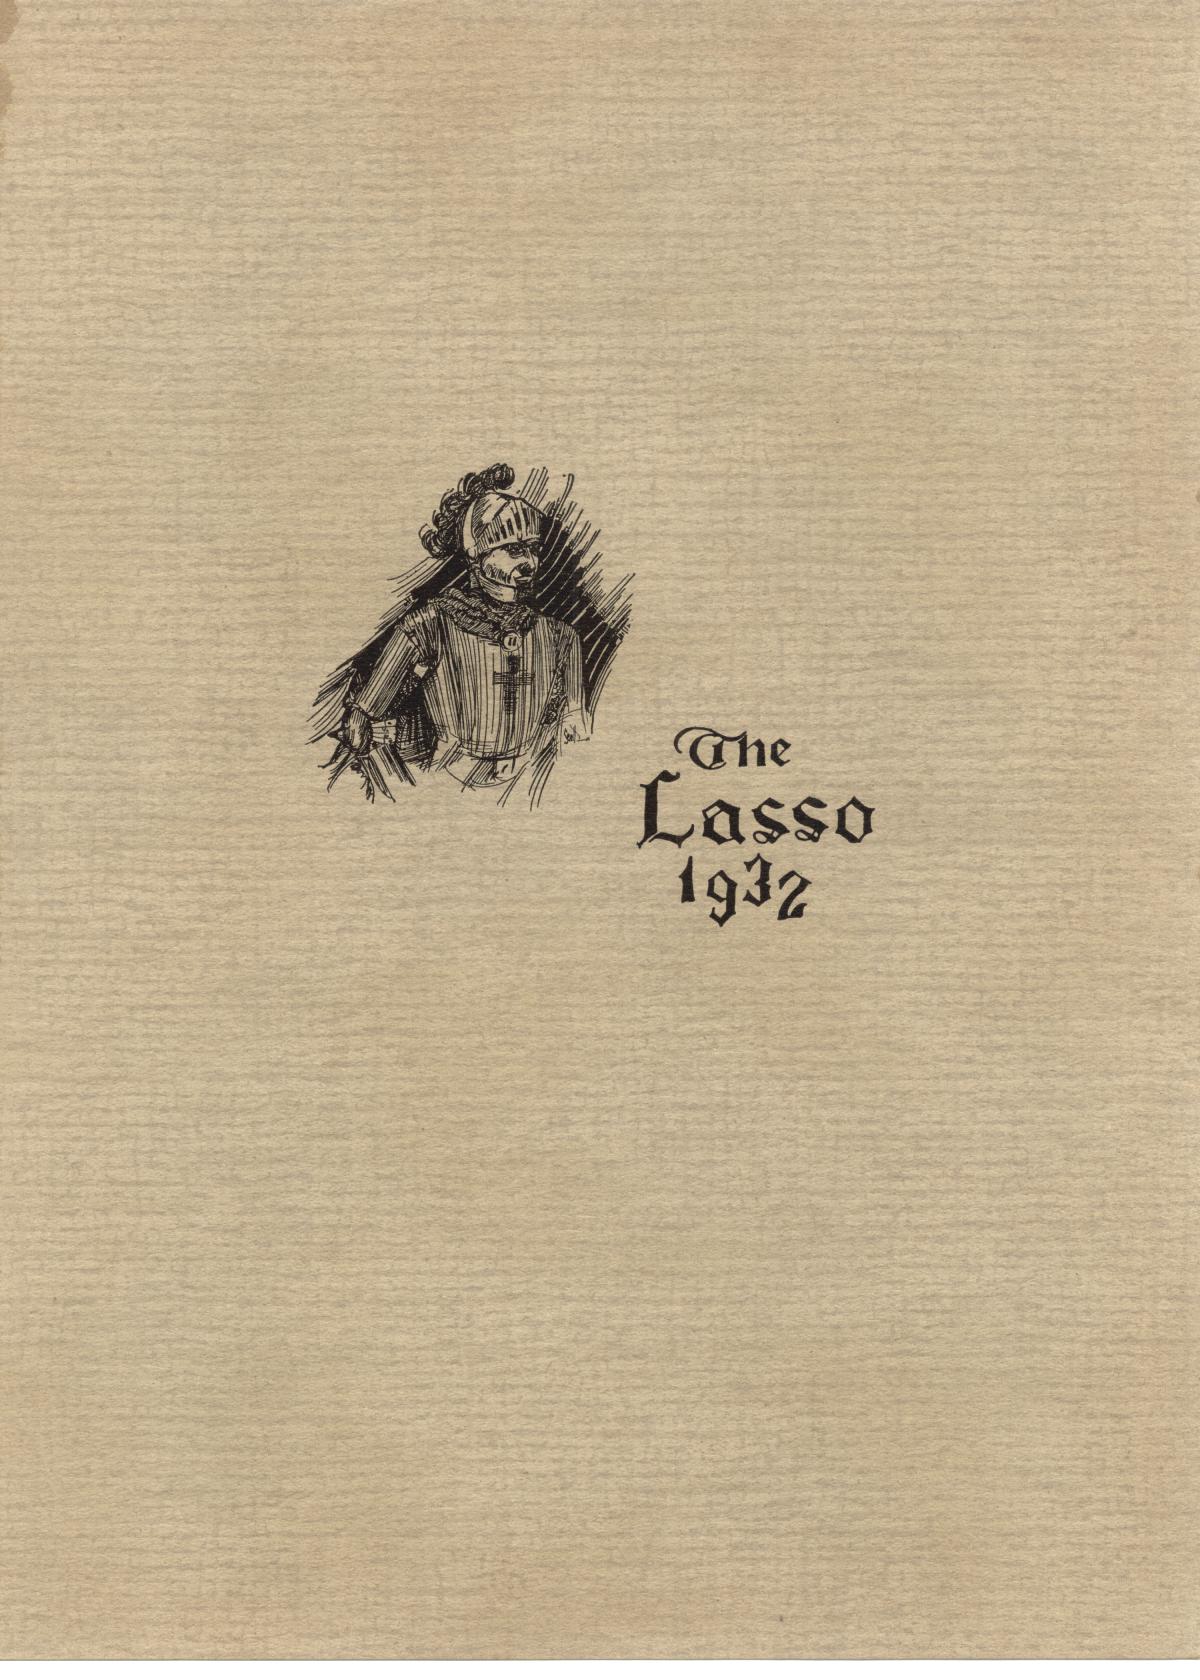 The Lasso, Yearbook of Howard Payne College, 1932
                                                
                                                    1
                                                